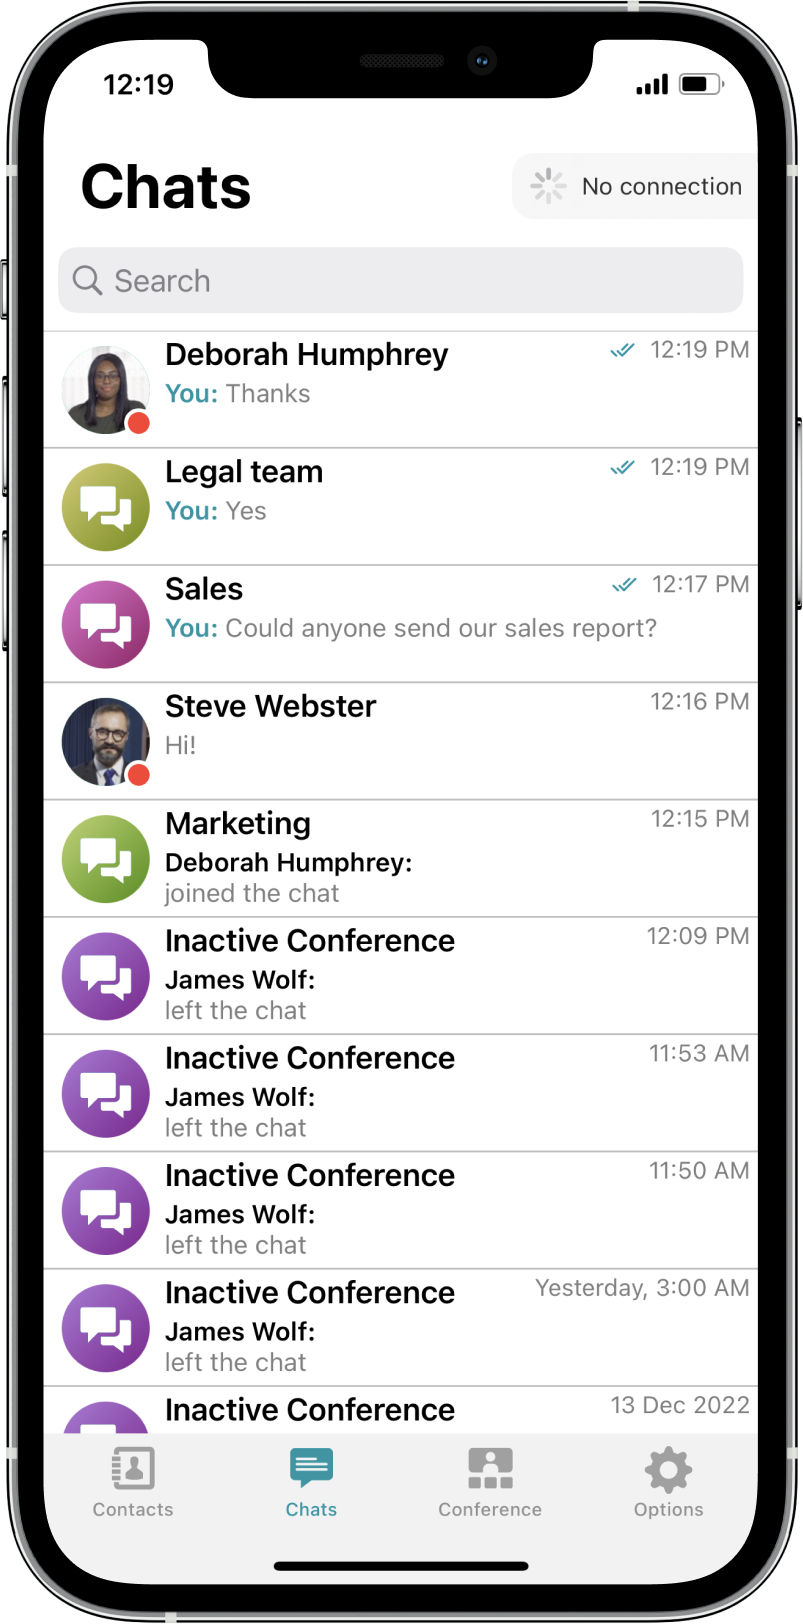 TrueConf 3.3 for iOS: new UI, Smart meeting mode, offline access to chats, contacts, and call history 7